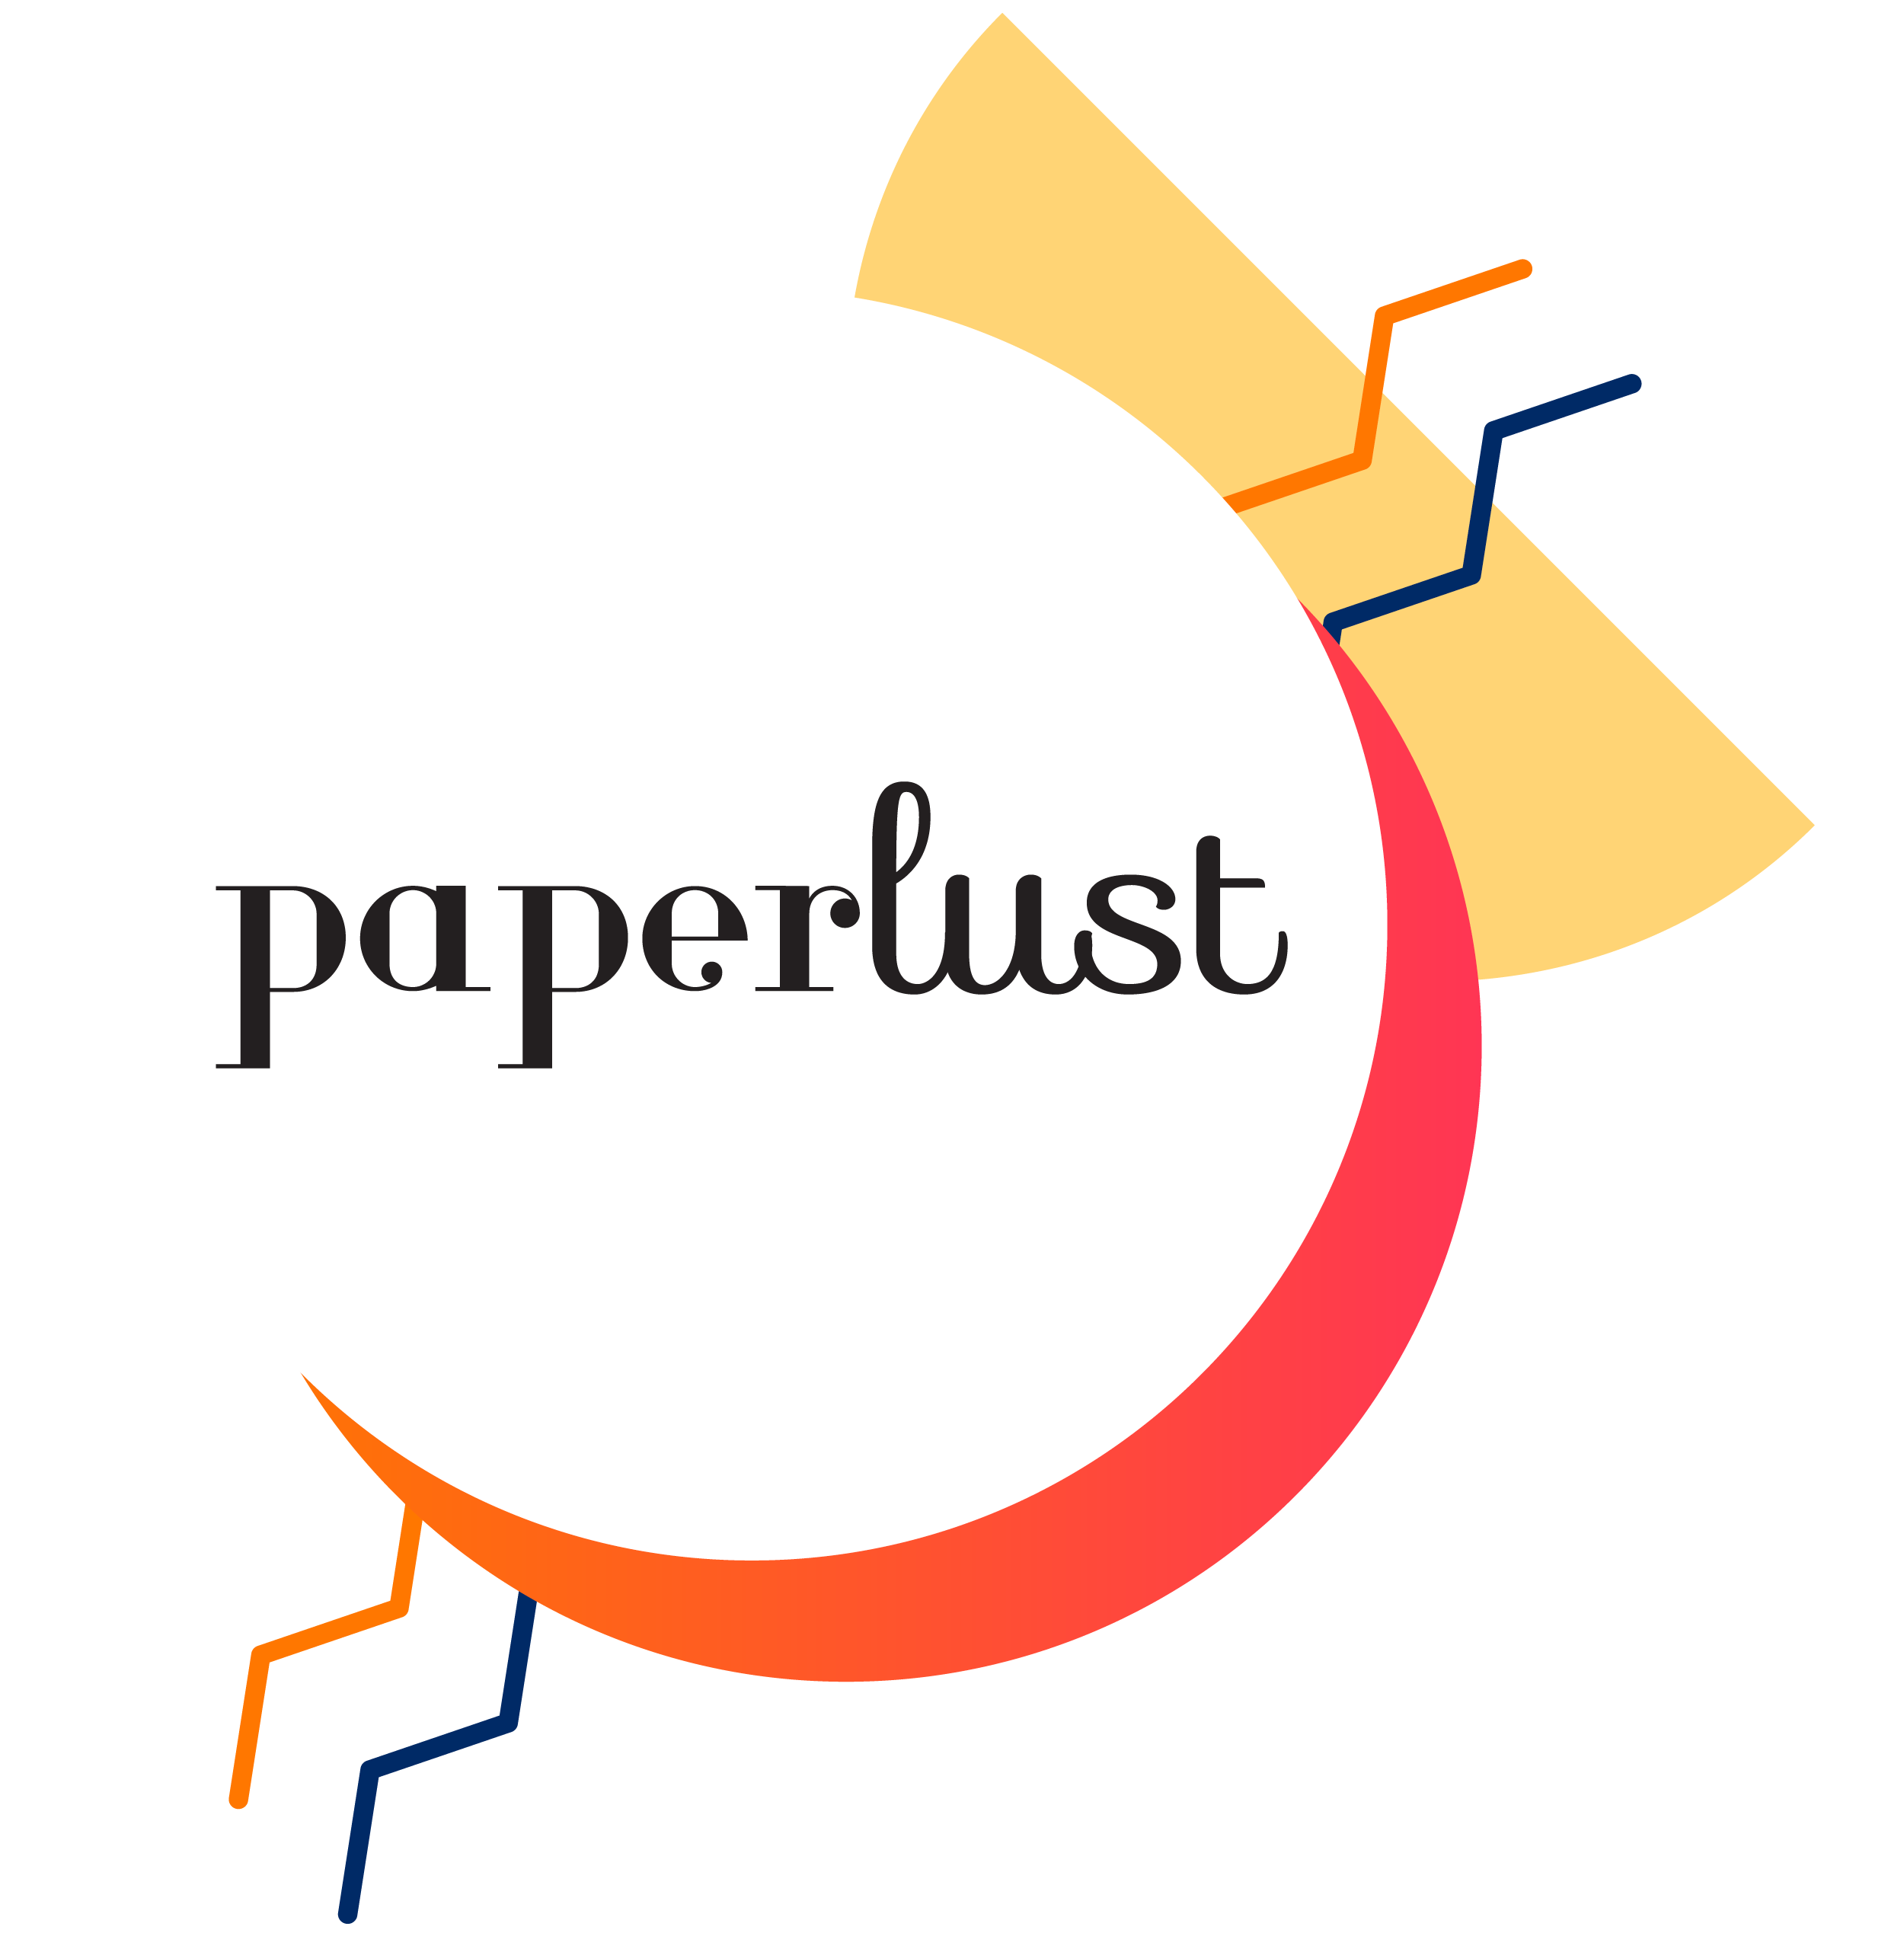 Paperlust logo with graphical elements